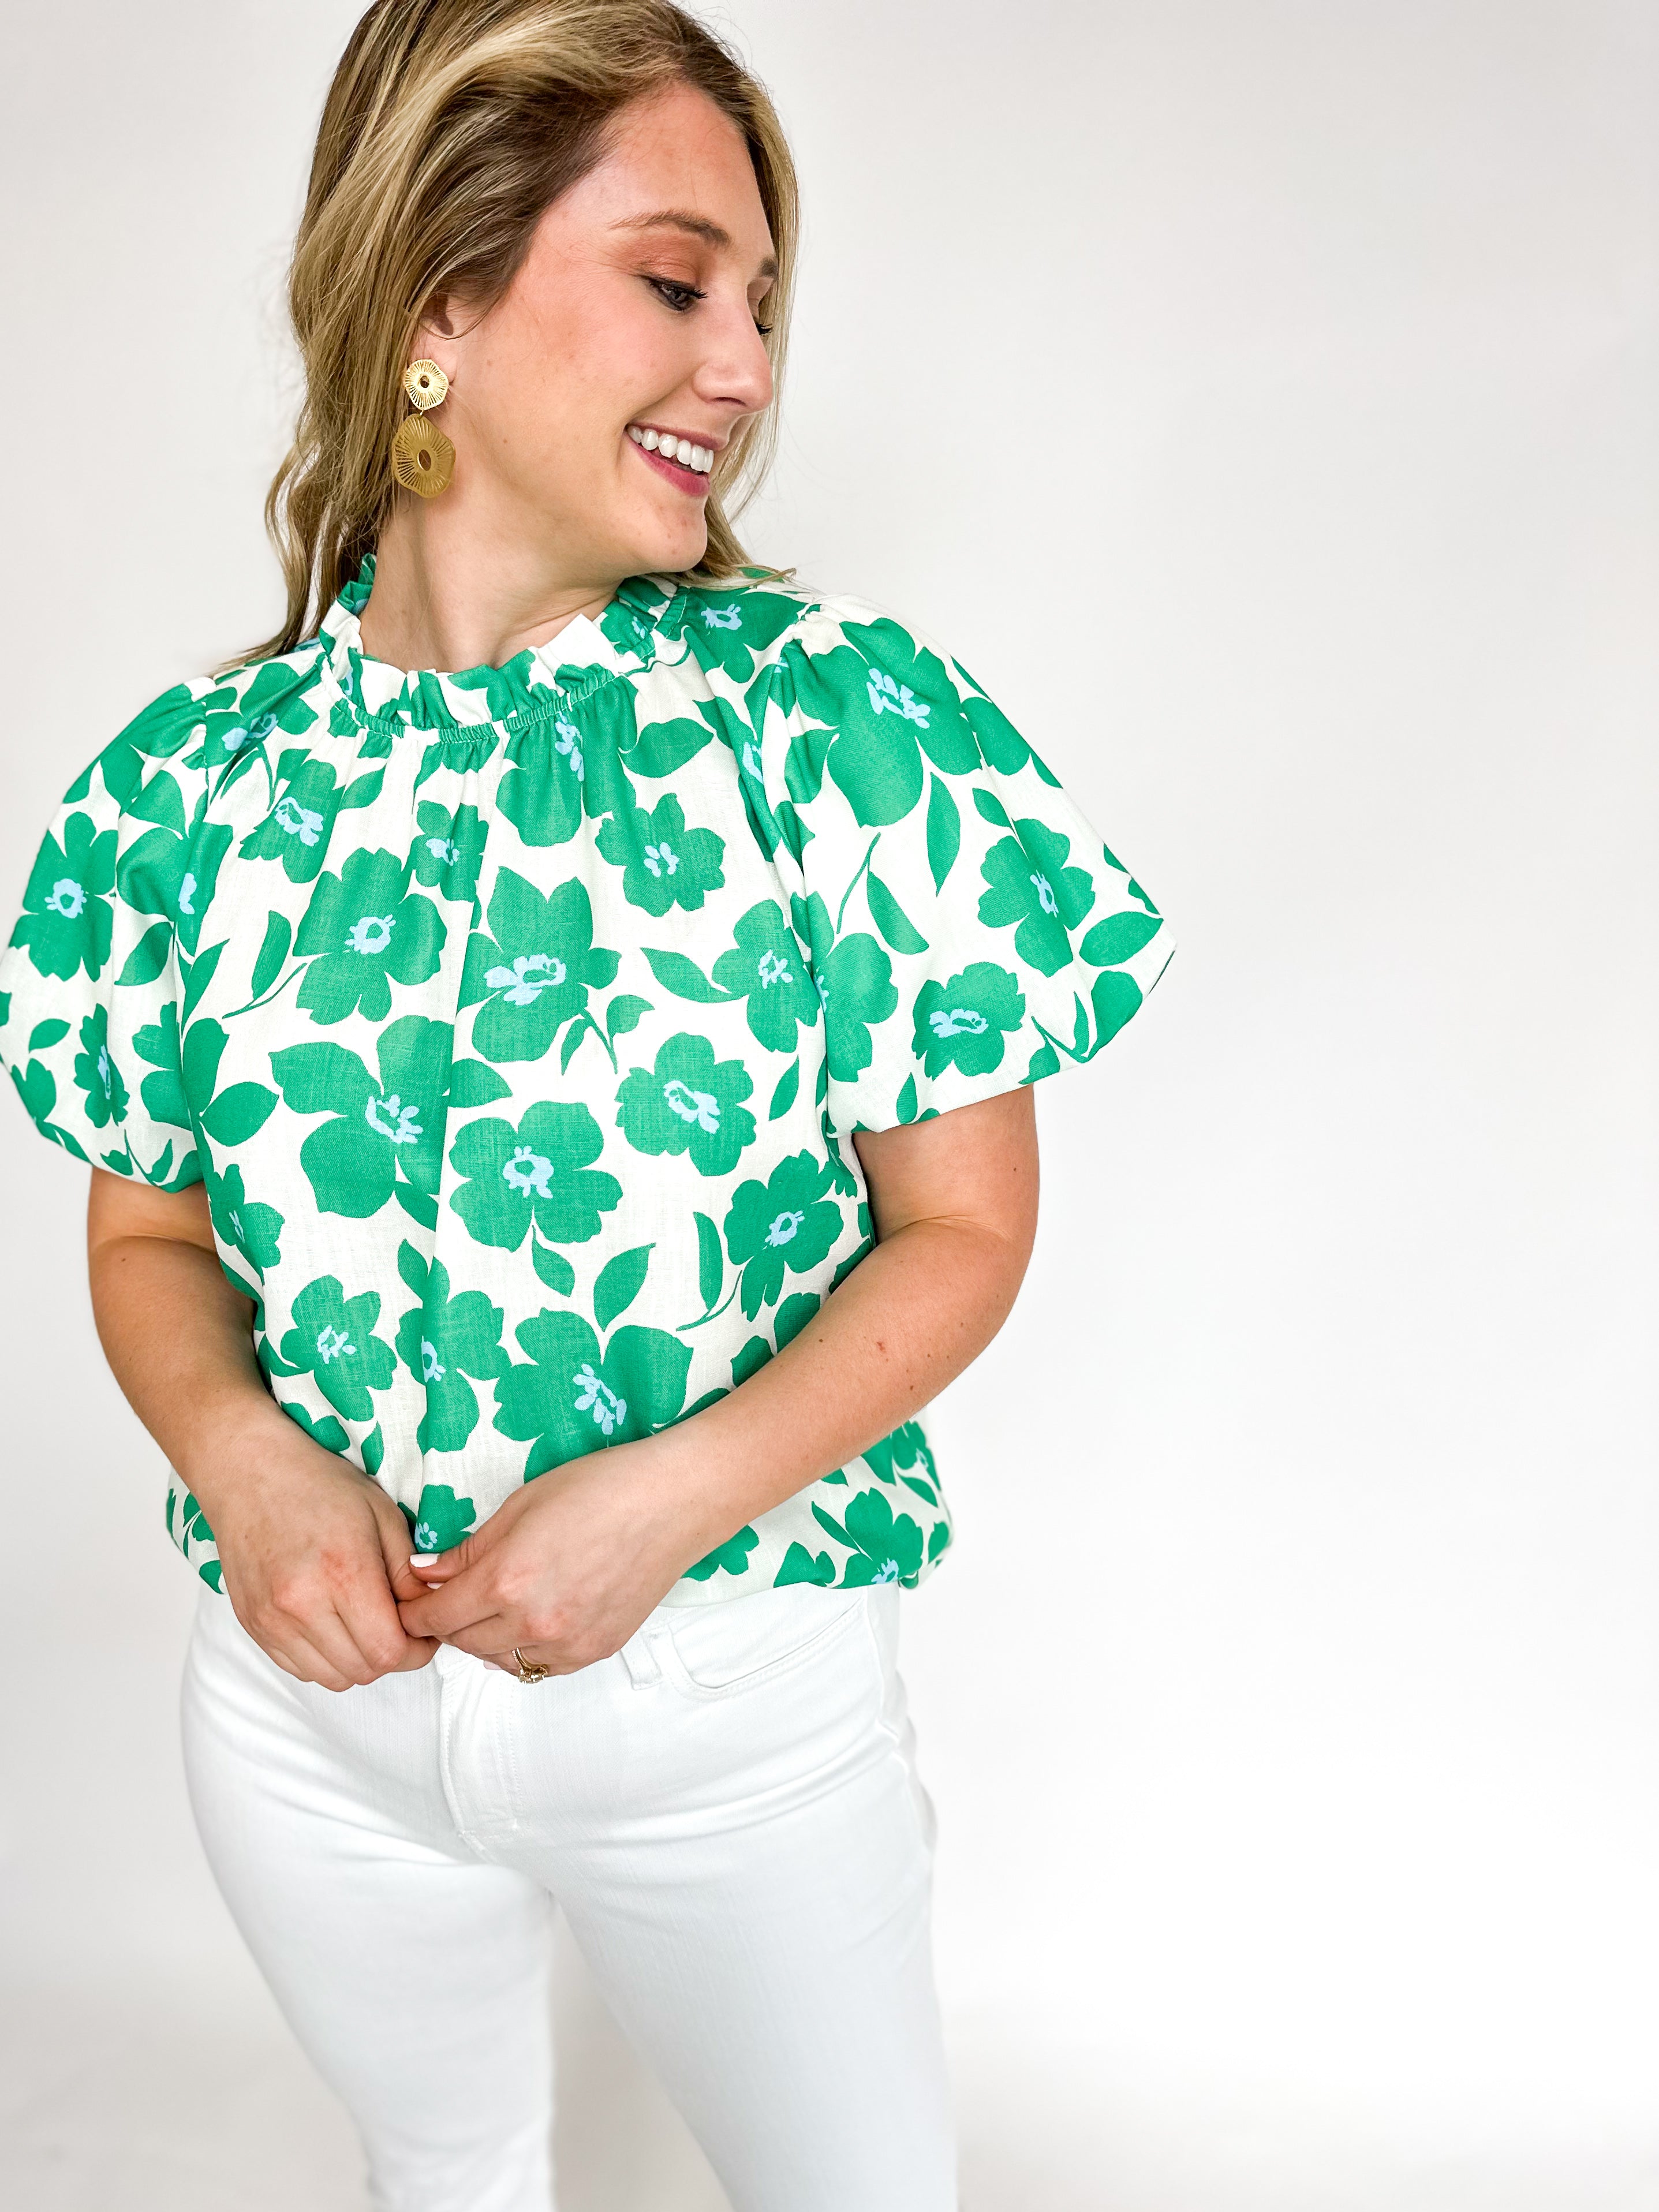 Kelly Floral Blouse-200 Fashion Blouses-JODIFL-July & June Women's Fashion Boutique Located in San Antonio, Texas